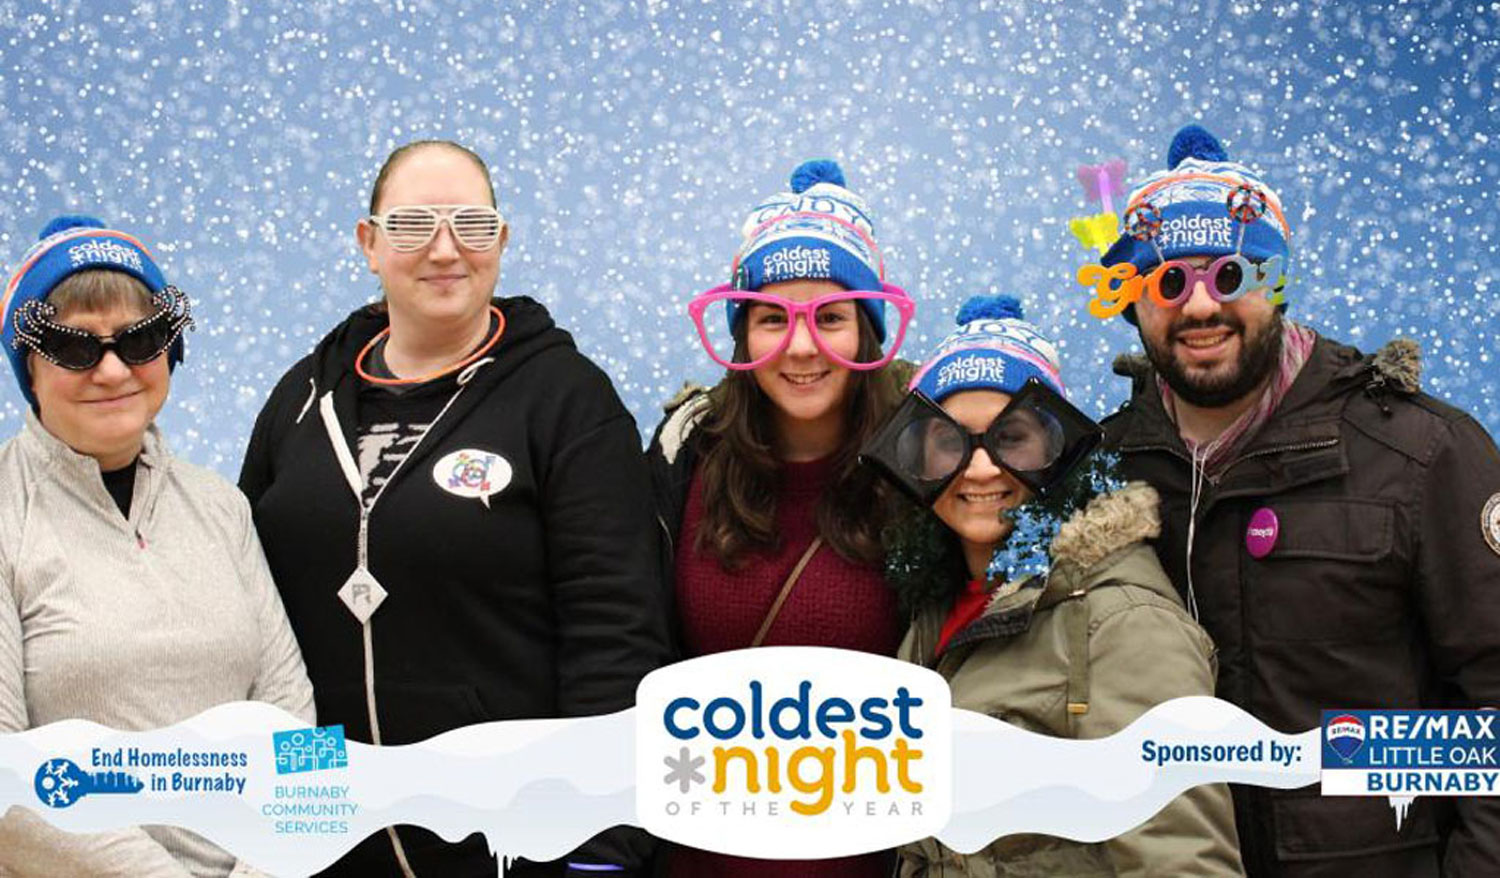 2019 Coldest Night of the year event